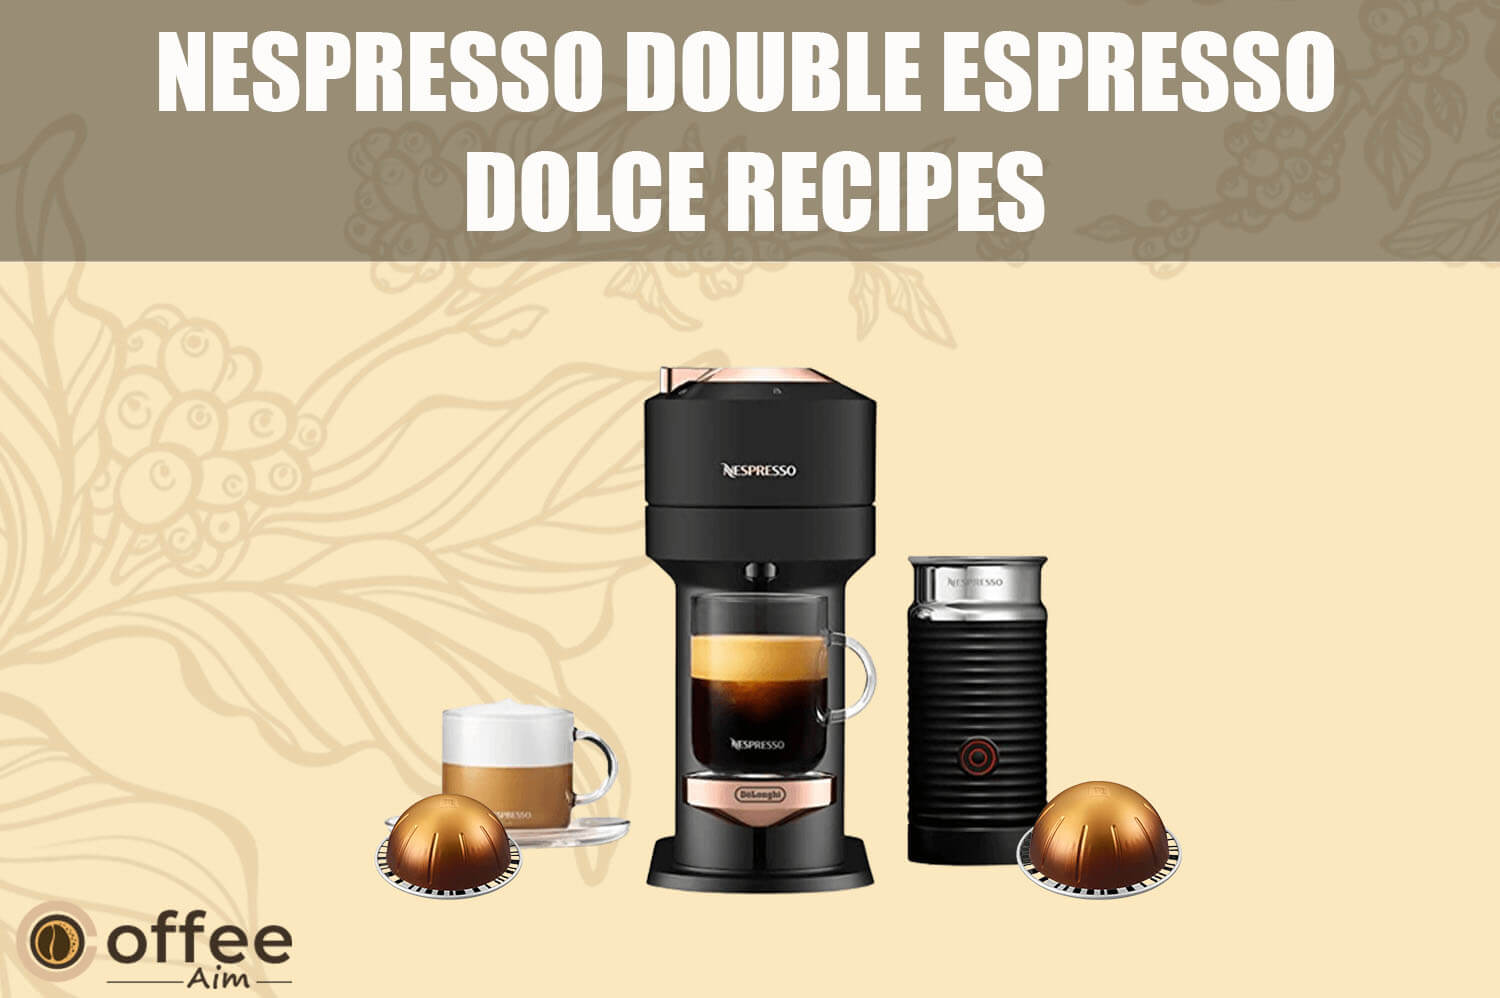 Featured image for the article "Nespresso Double Espresso Dolce Recipes"